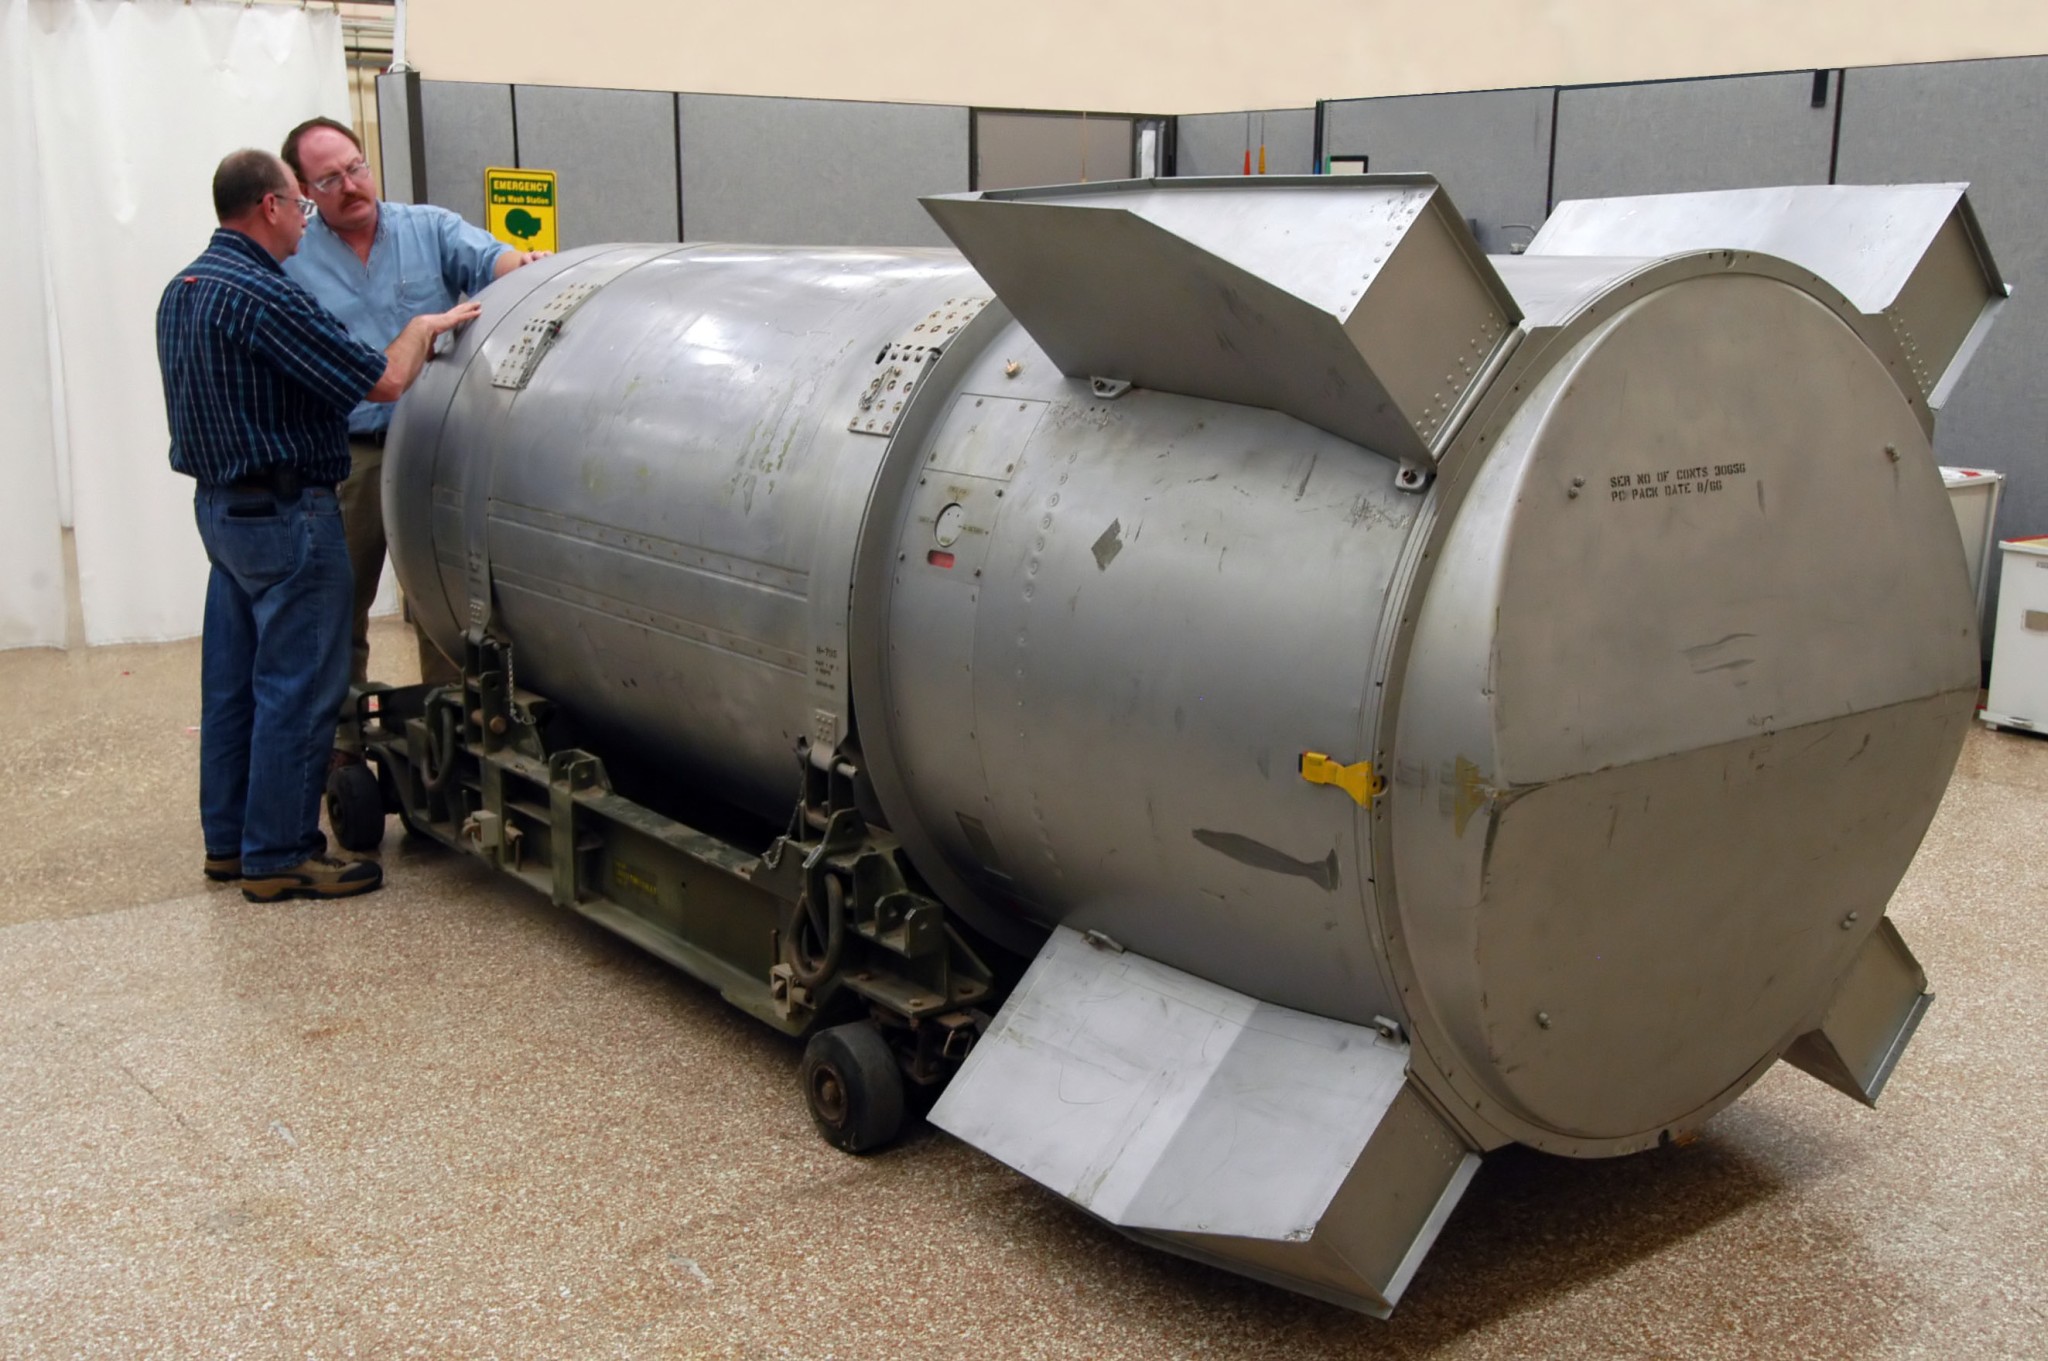 Inspection_of_B53_nuclear_bomb_2006.jpg